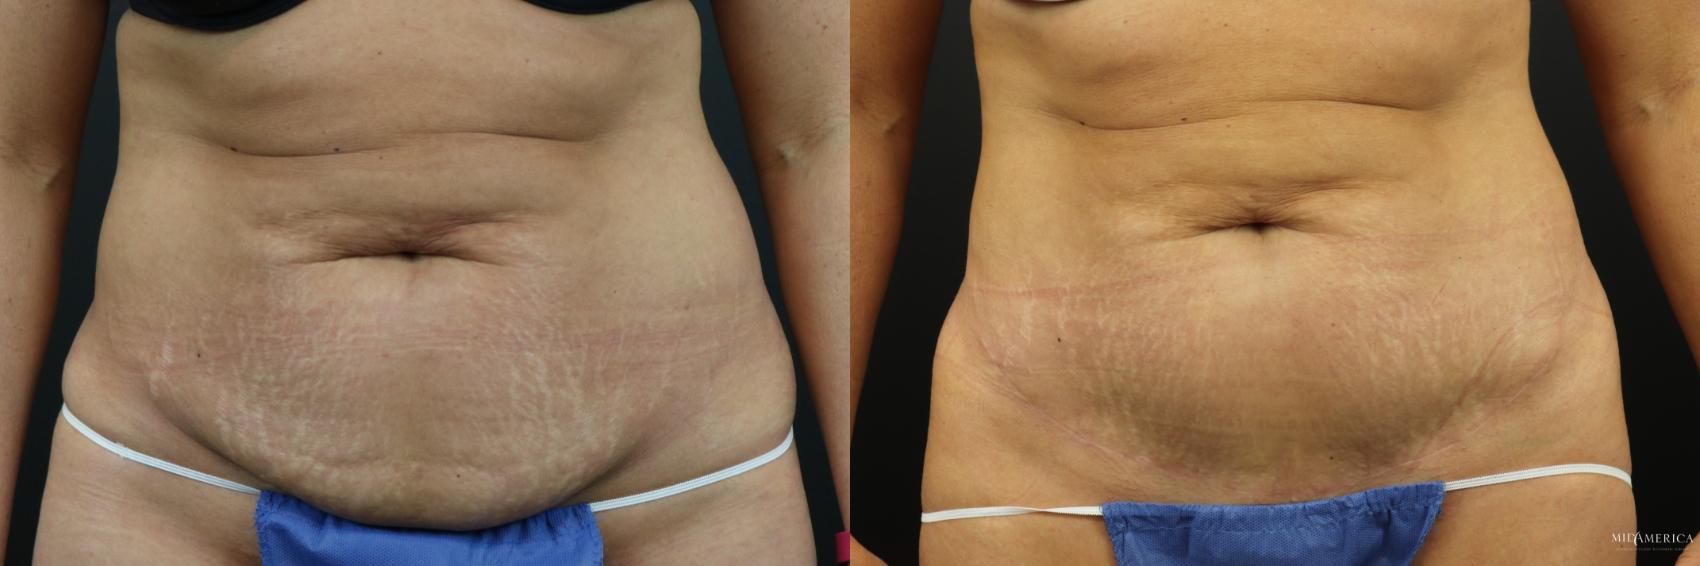 Before & After Tummy Tuck Case 224 Front View in St. Louis, MO